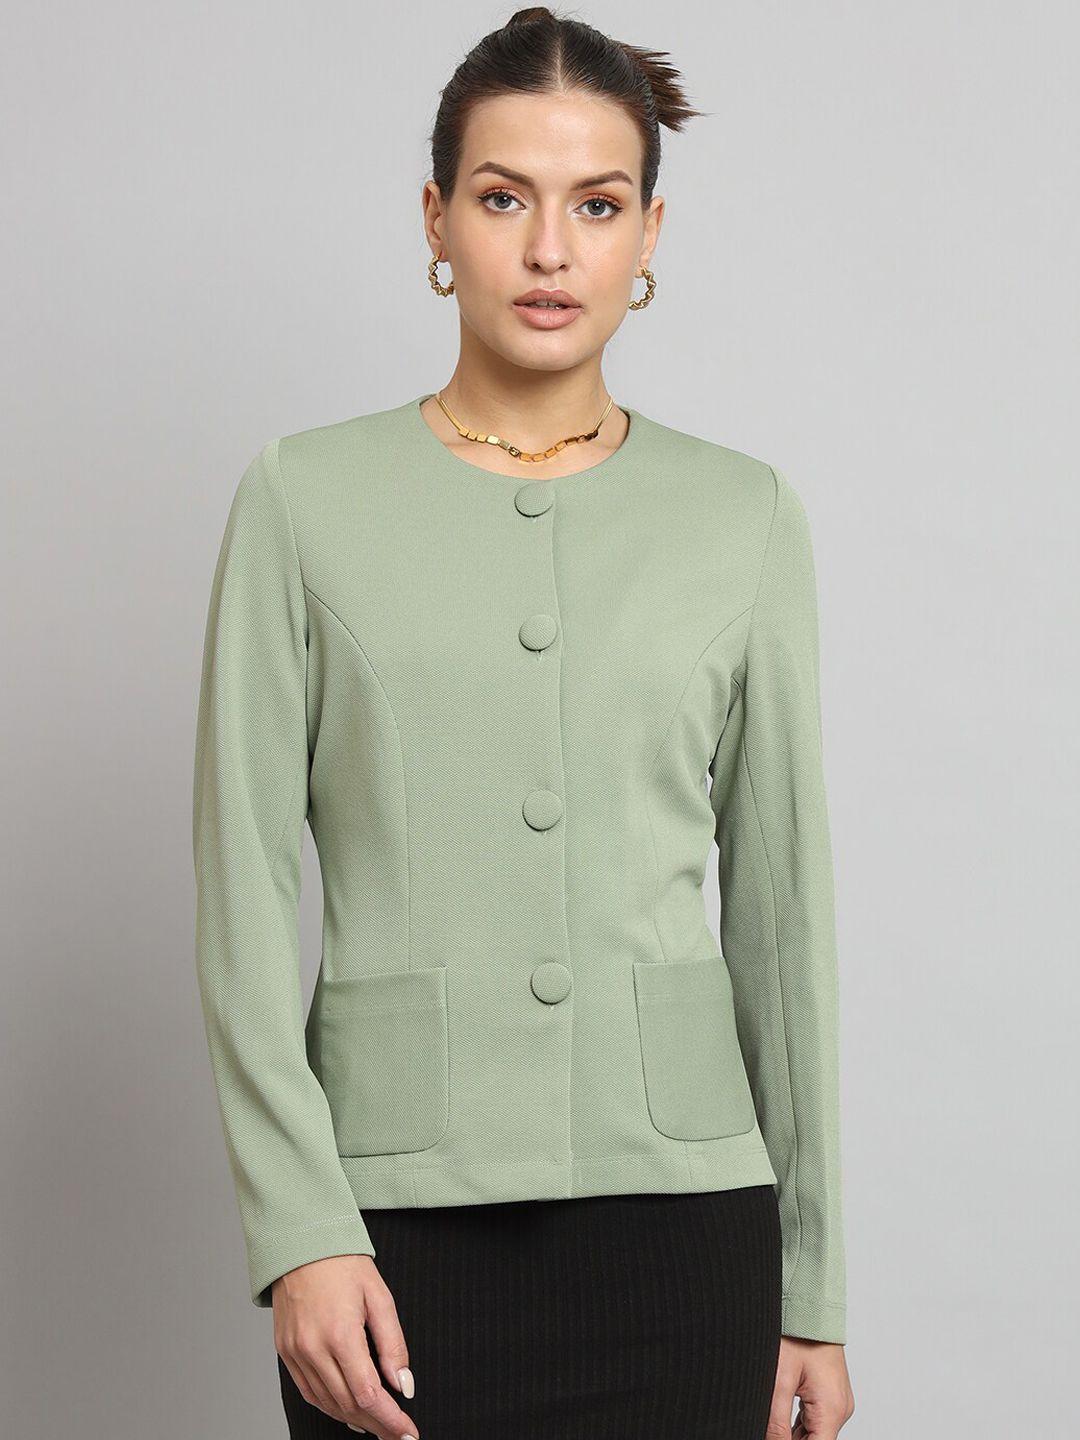 powersutra collarless open front jacket